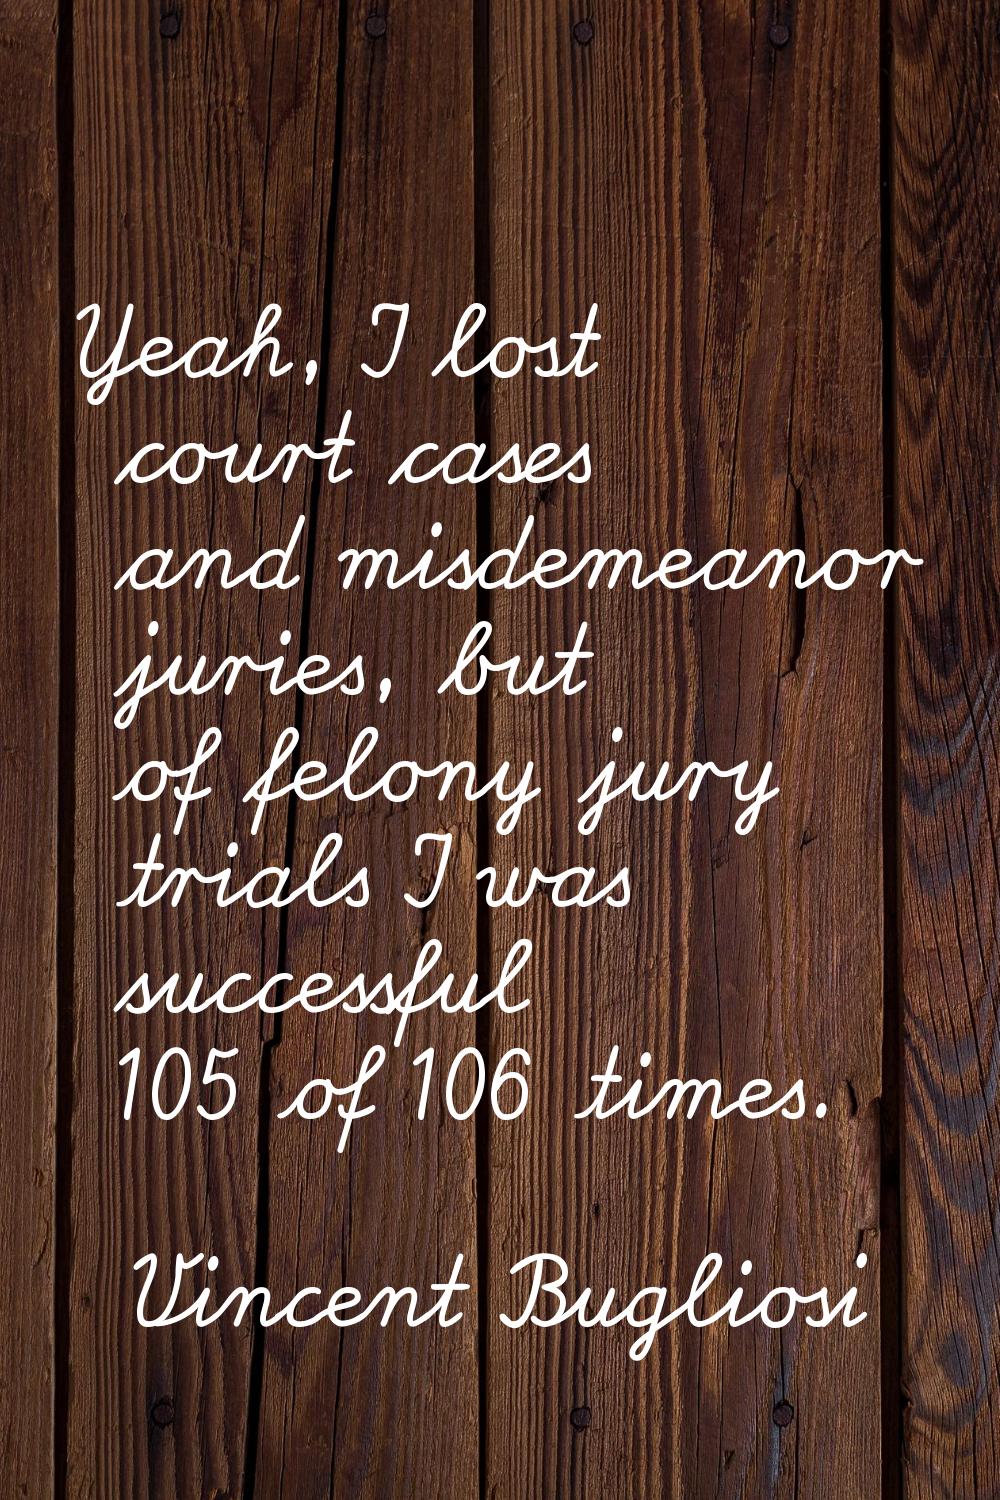 Yeah, I lost court cases and misdemeanor juries, but of felony jury trials I was successful 105 of 